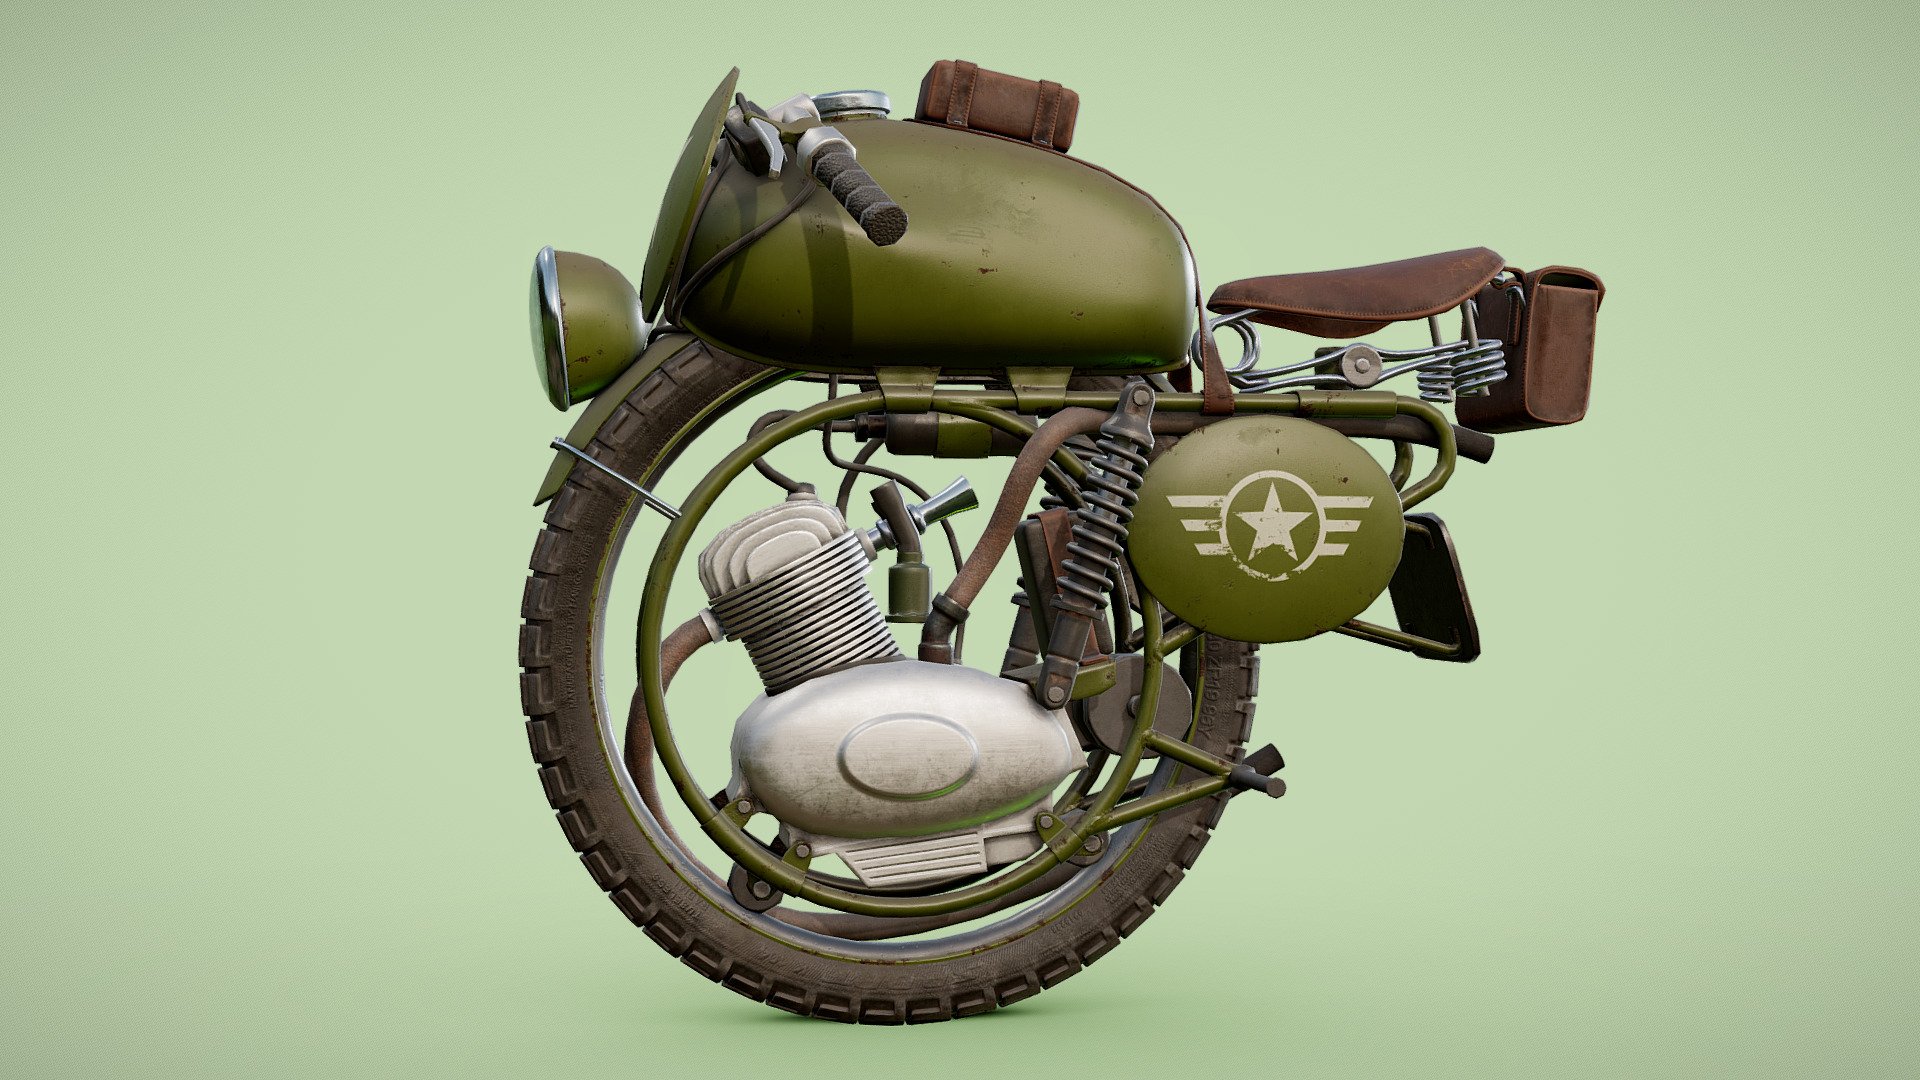 This work is derivative of MotoWheel by Costr, used under CC BY

I saw this beautiful model made by Costr on sketchfab and instantly felt desire to give it some good looking texture.

Changes made to the model: added some additional polygons where i feel it's needed, fully unwrapped UVs, authored PBR textures 3d model